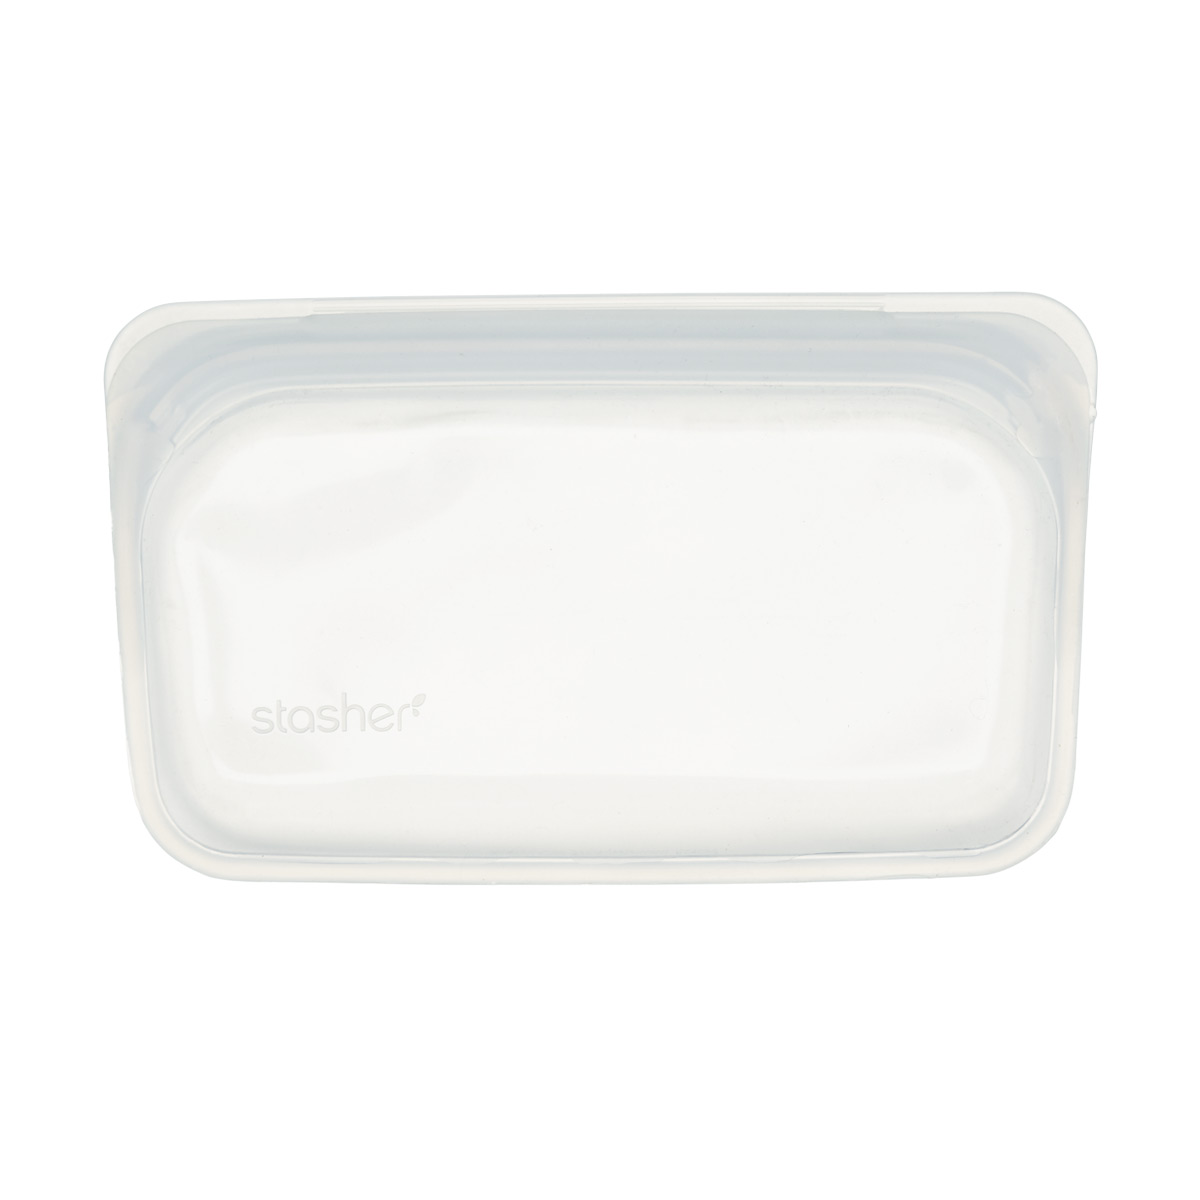 https://www.containerstore.com/catalogimages/360878/10077318-stasher-silicone-reusablesn.jpg